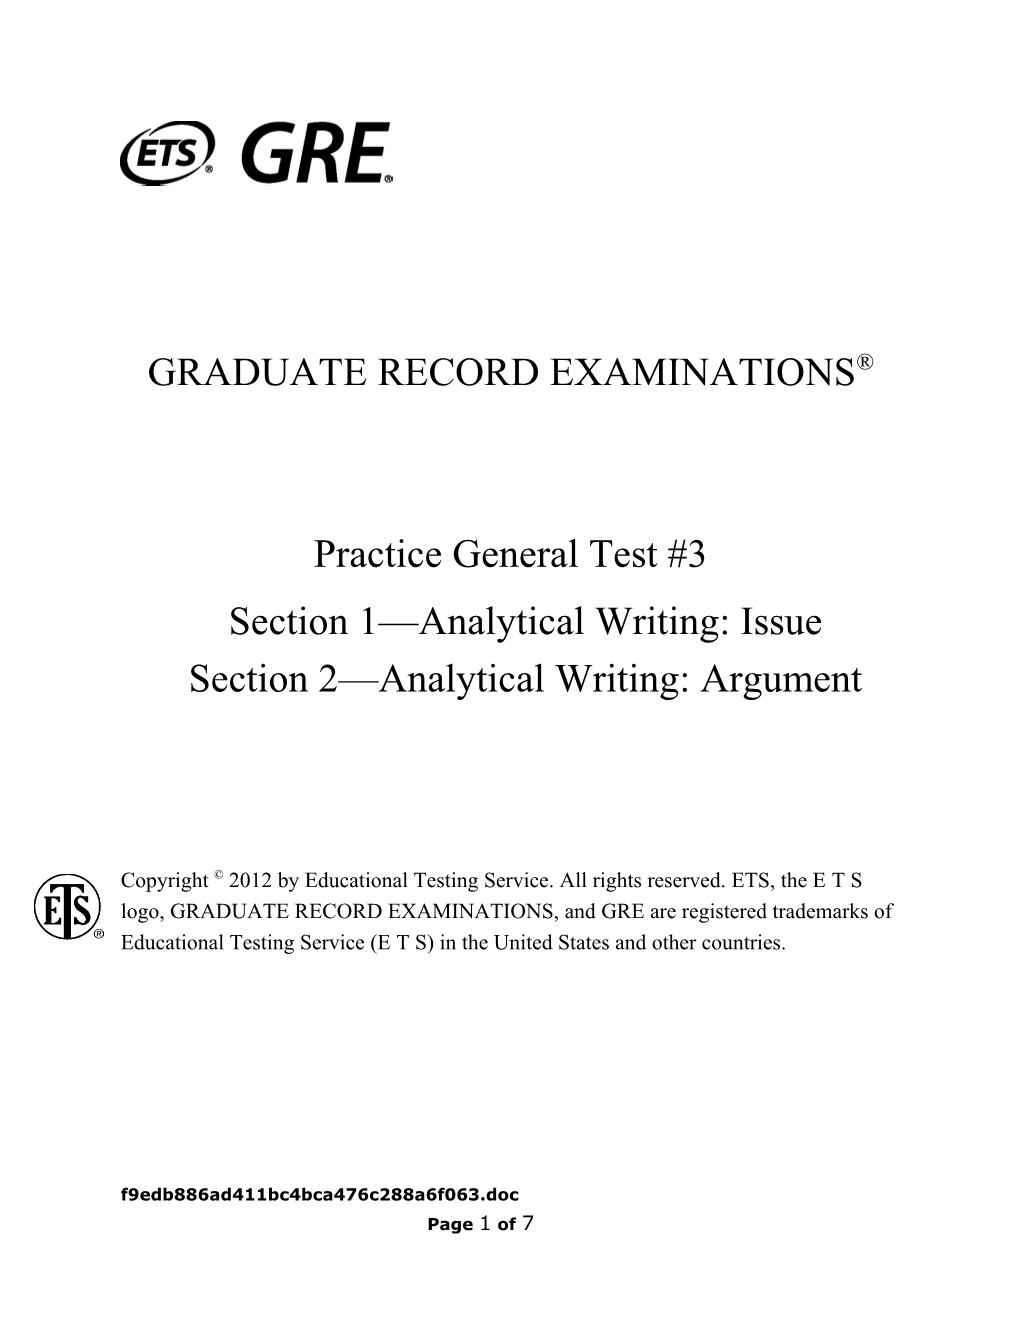 GRE Practice 3 Analytical Writing s1